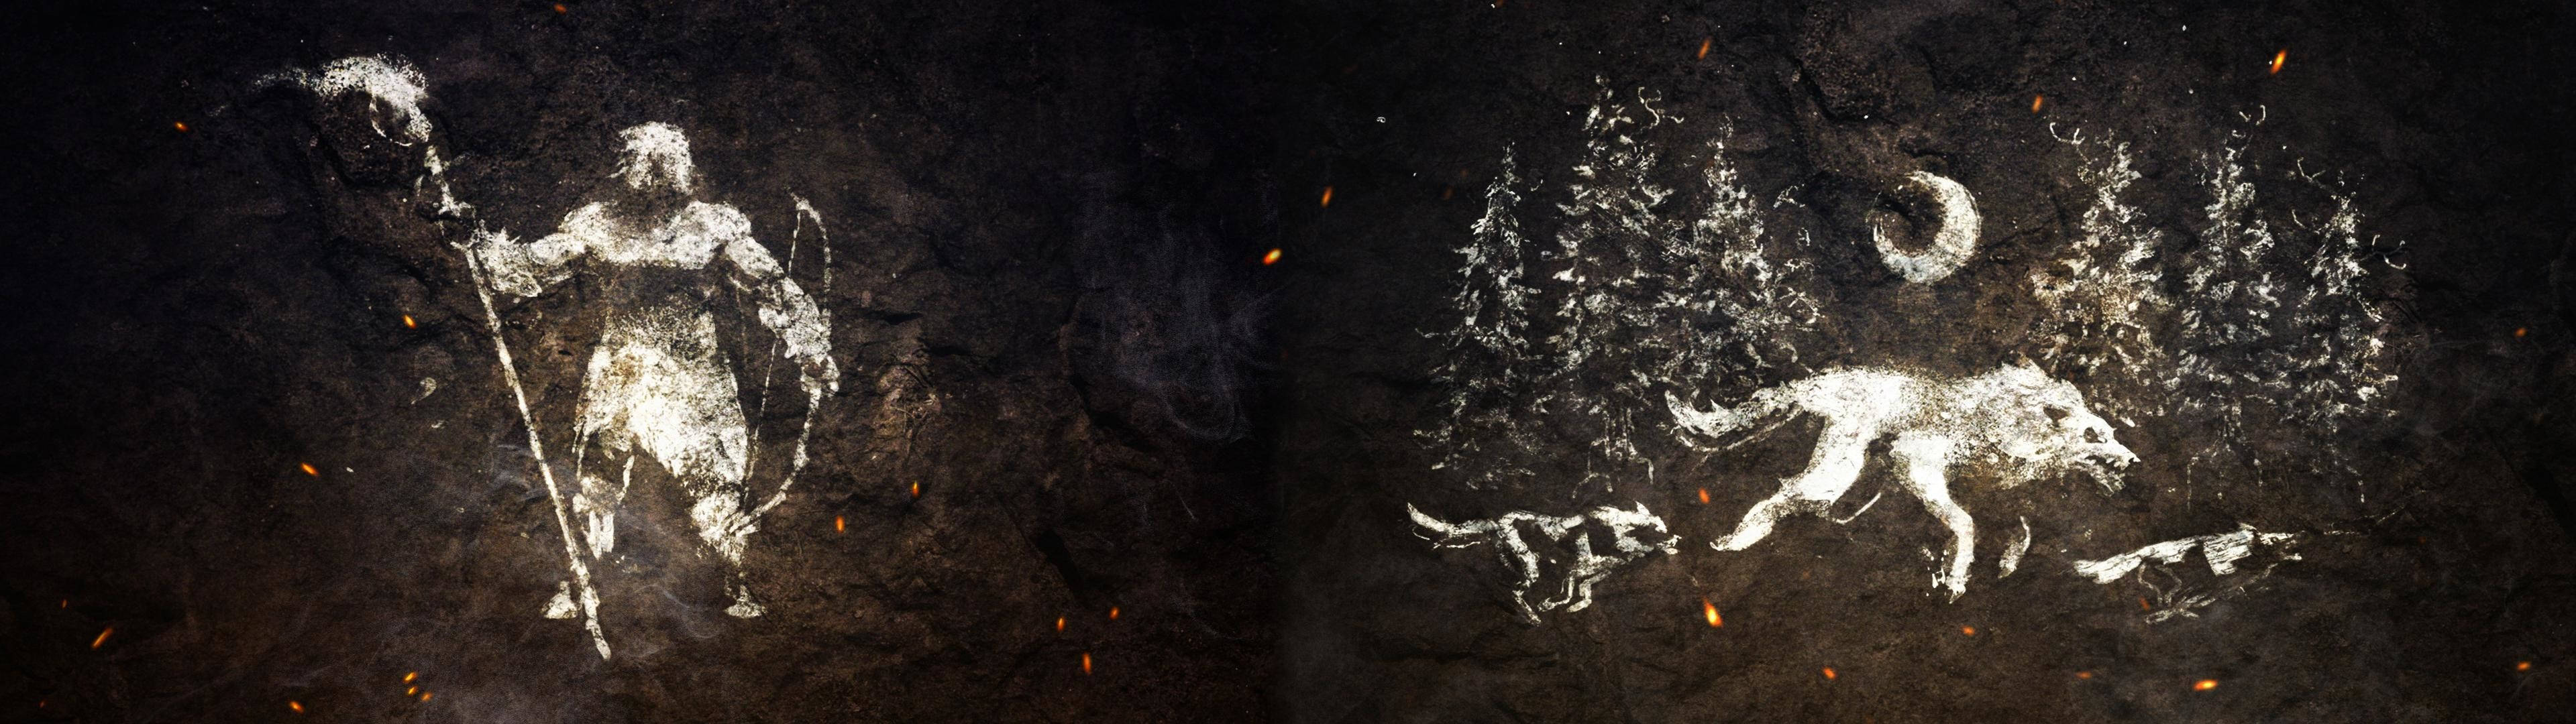 3840x1080 Hd Dual Monitor Cave Art Background